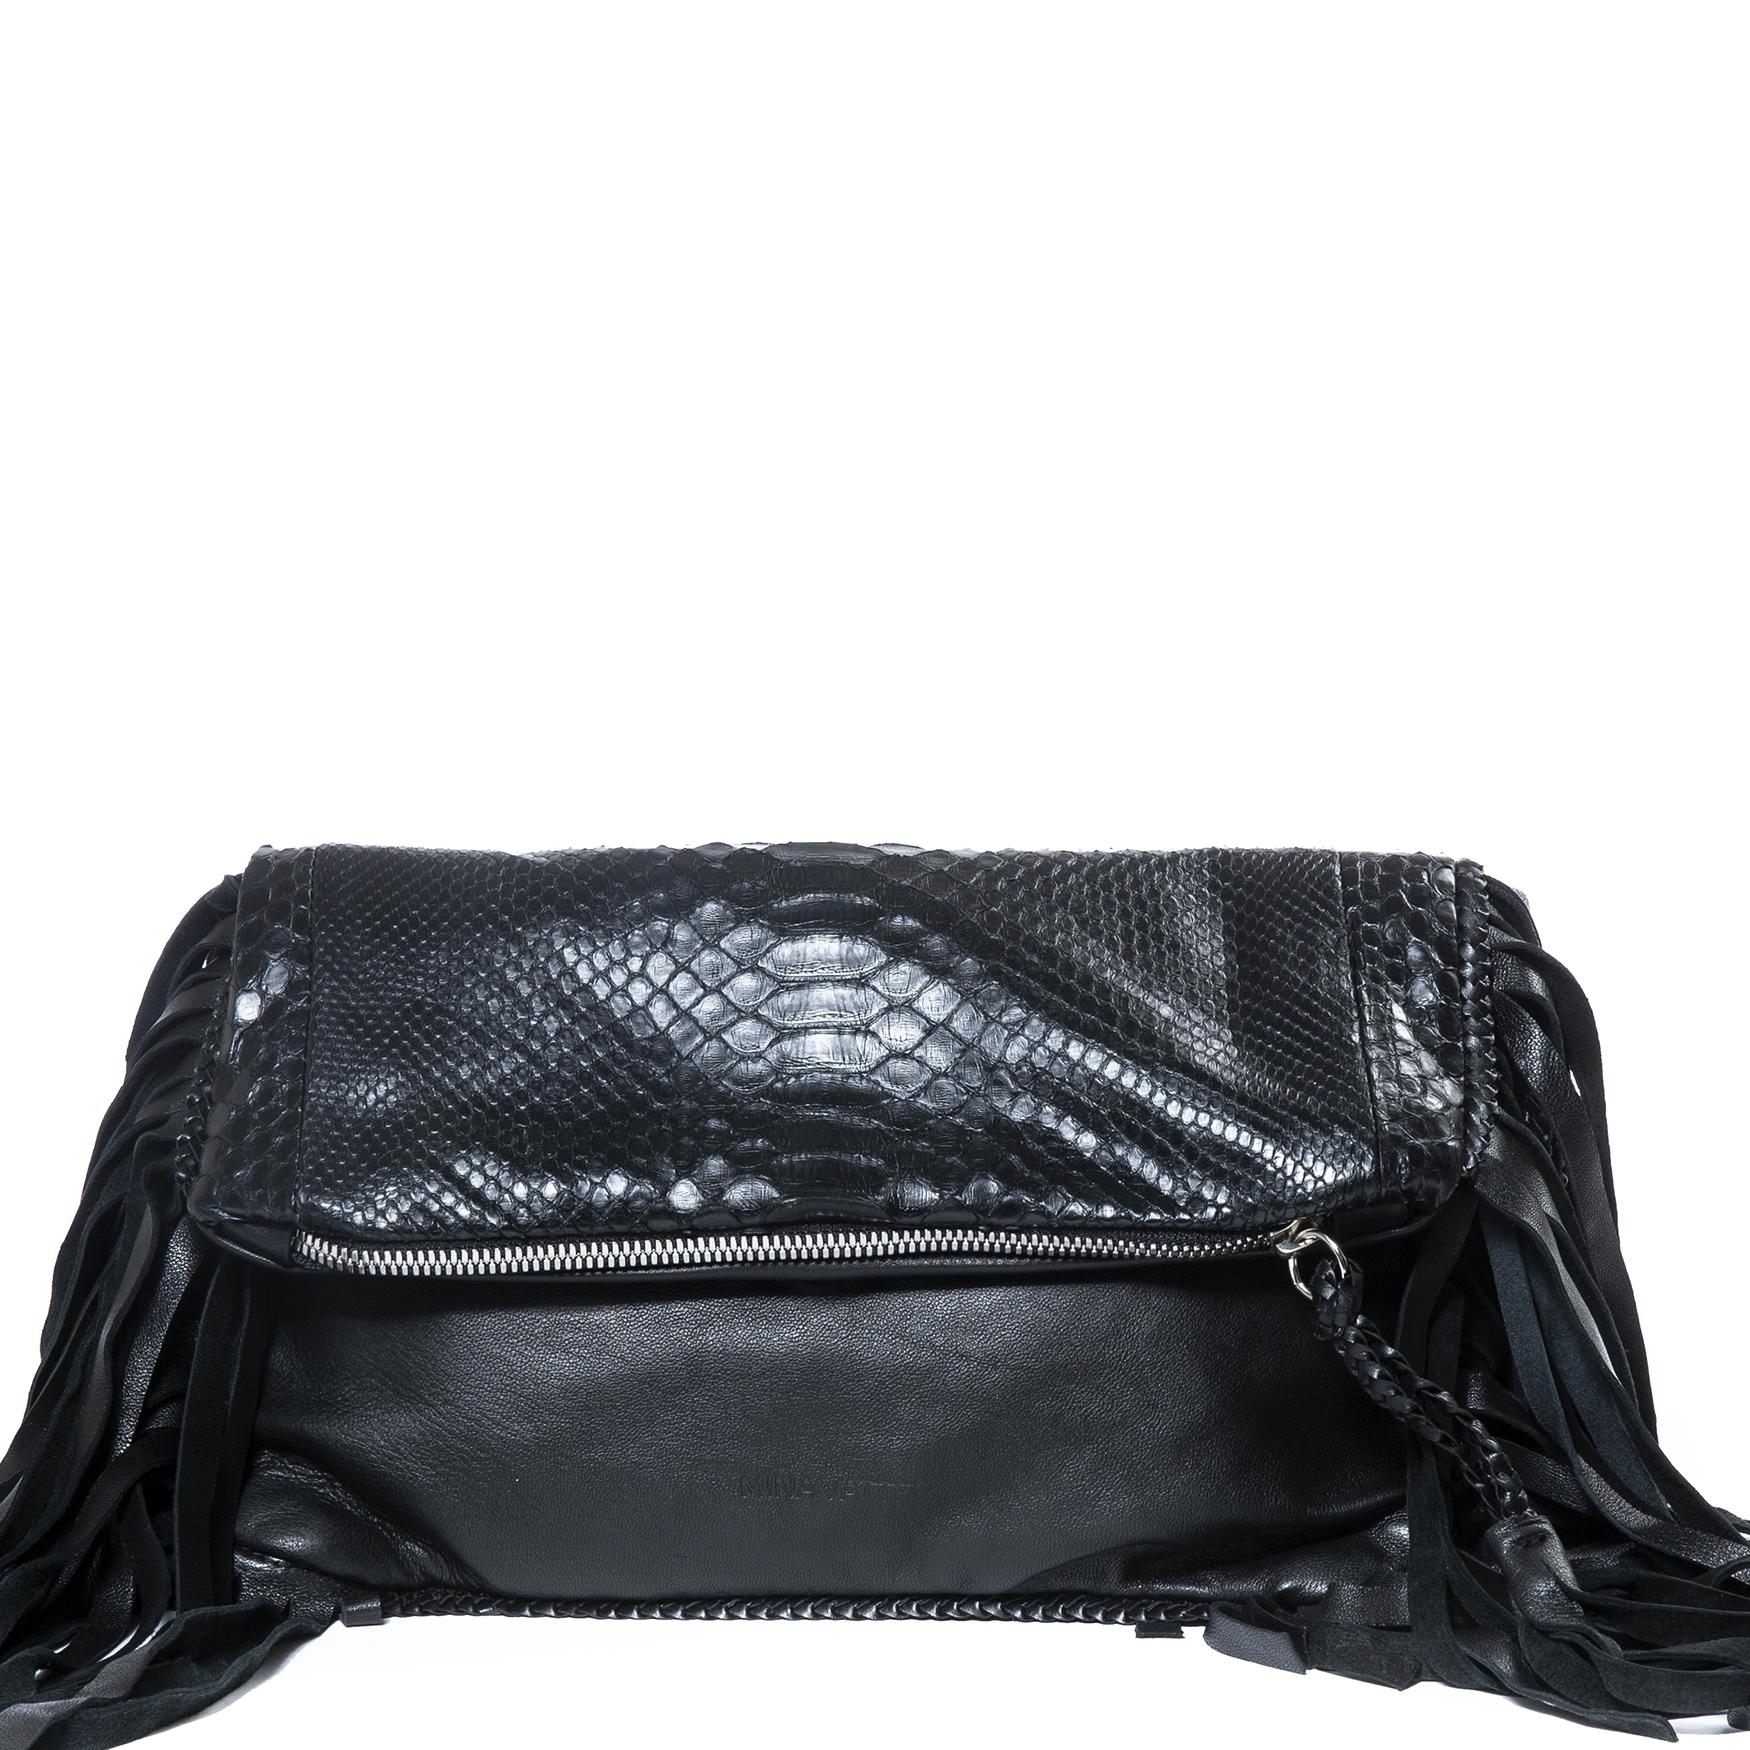 Very good condition

Mina Vatter Black Fringe Clutch

Looking for a beautiful, unique, yet easy-to-combine clutch?
This gorgeous clutch by Mina Vatter is crafted from black leather and features fringe details. 
A part of the clutch is smooth and a